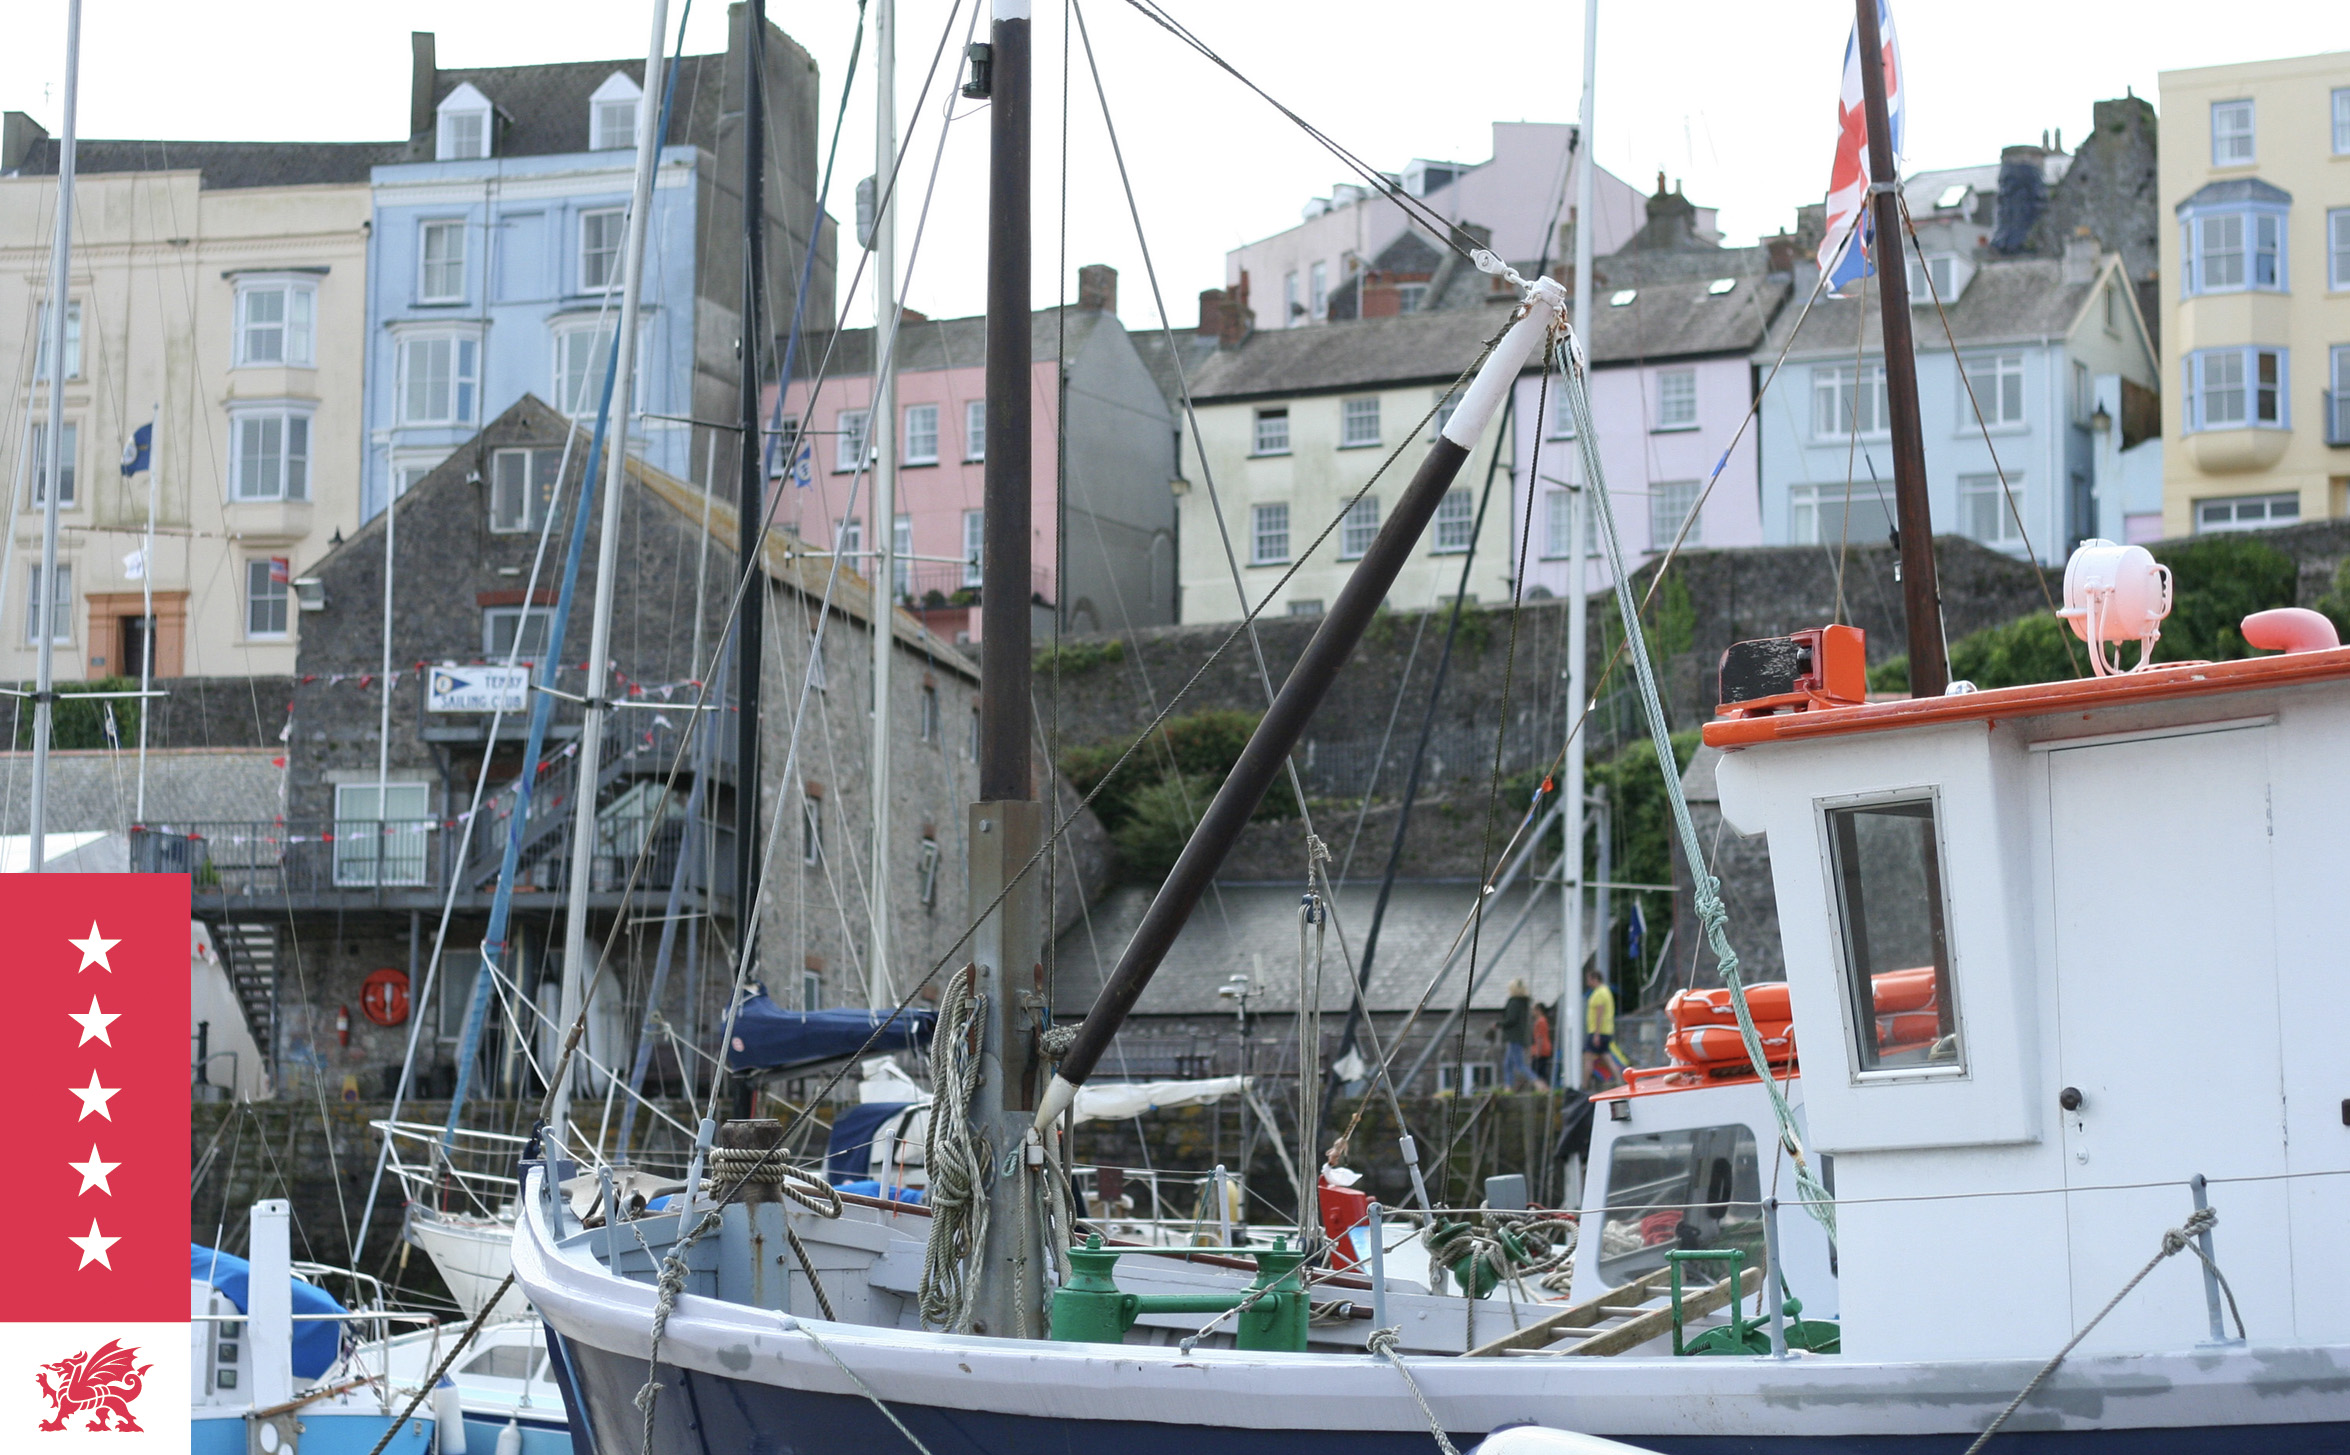 View of Tenby from the harbour